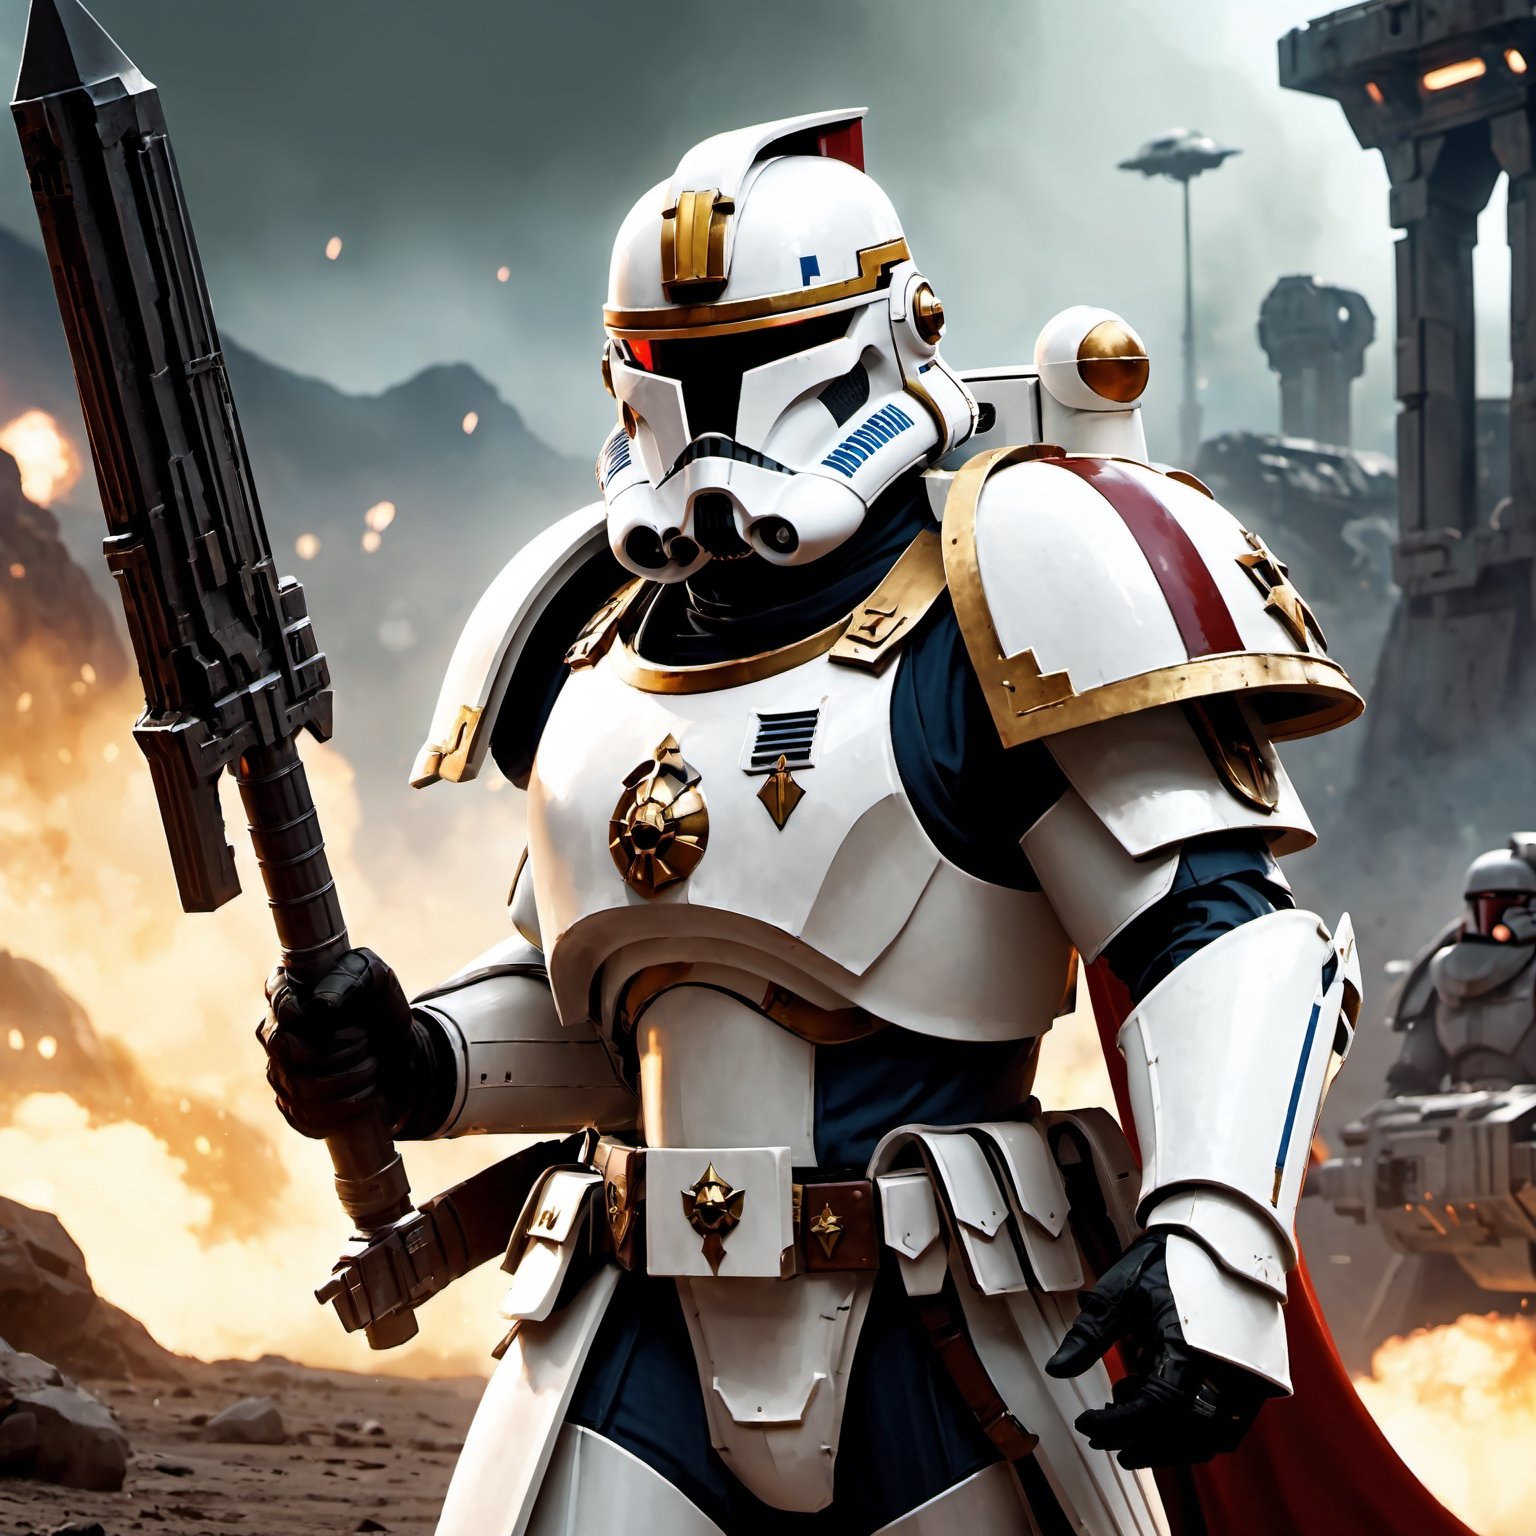 (8k HDR), (masterpiece, best quality), ((Warhammer)), 

"Generate an image of a Clone Trooper from the Star Wars universe transformed into a mighty Space Marine of the Warhammer 40k universe. His armor, once sleek and white, now bears the iconic colors and symbols of the Space Marines, adorned with intricate filigree and embellishments that mark him as a warrior of the Adeptus Astartes. The trooper's helmet has been redesigned to incorporate the intimidating features of a Space Marine helm, with glowing red eyes and a stoic expression that speaks of unwavering determination. In one hand, he wields a bolter, a weapon of devastating power and precision, while in the other hand, he carries a combat knife with a serrated edge, ready to engage in close-quarters combat. Behind him, the backdrop depicts a war-torn battlefield littered with the remnants of battle, as he stands tall and resolute, a beacon of strength and valor in the grim darkness of the far future."

(michael bay camera shots), dark atmosphere, vibrant colors, depth of field, 